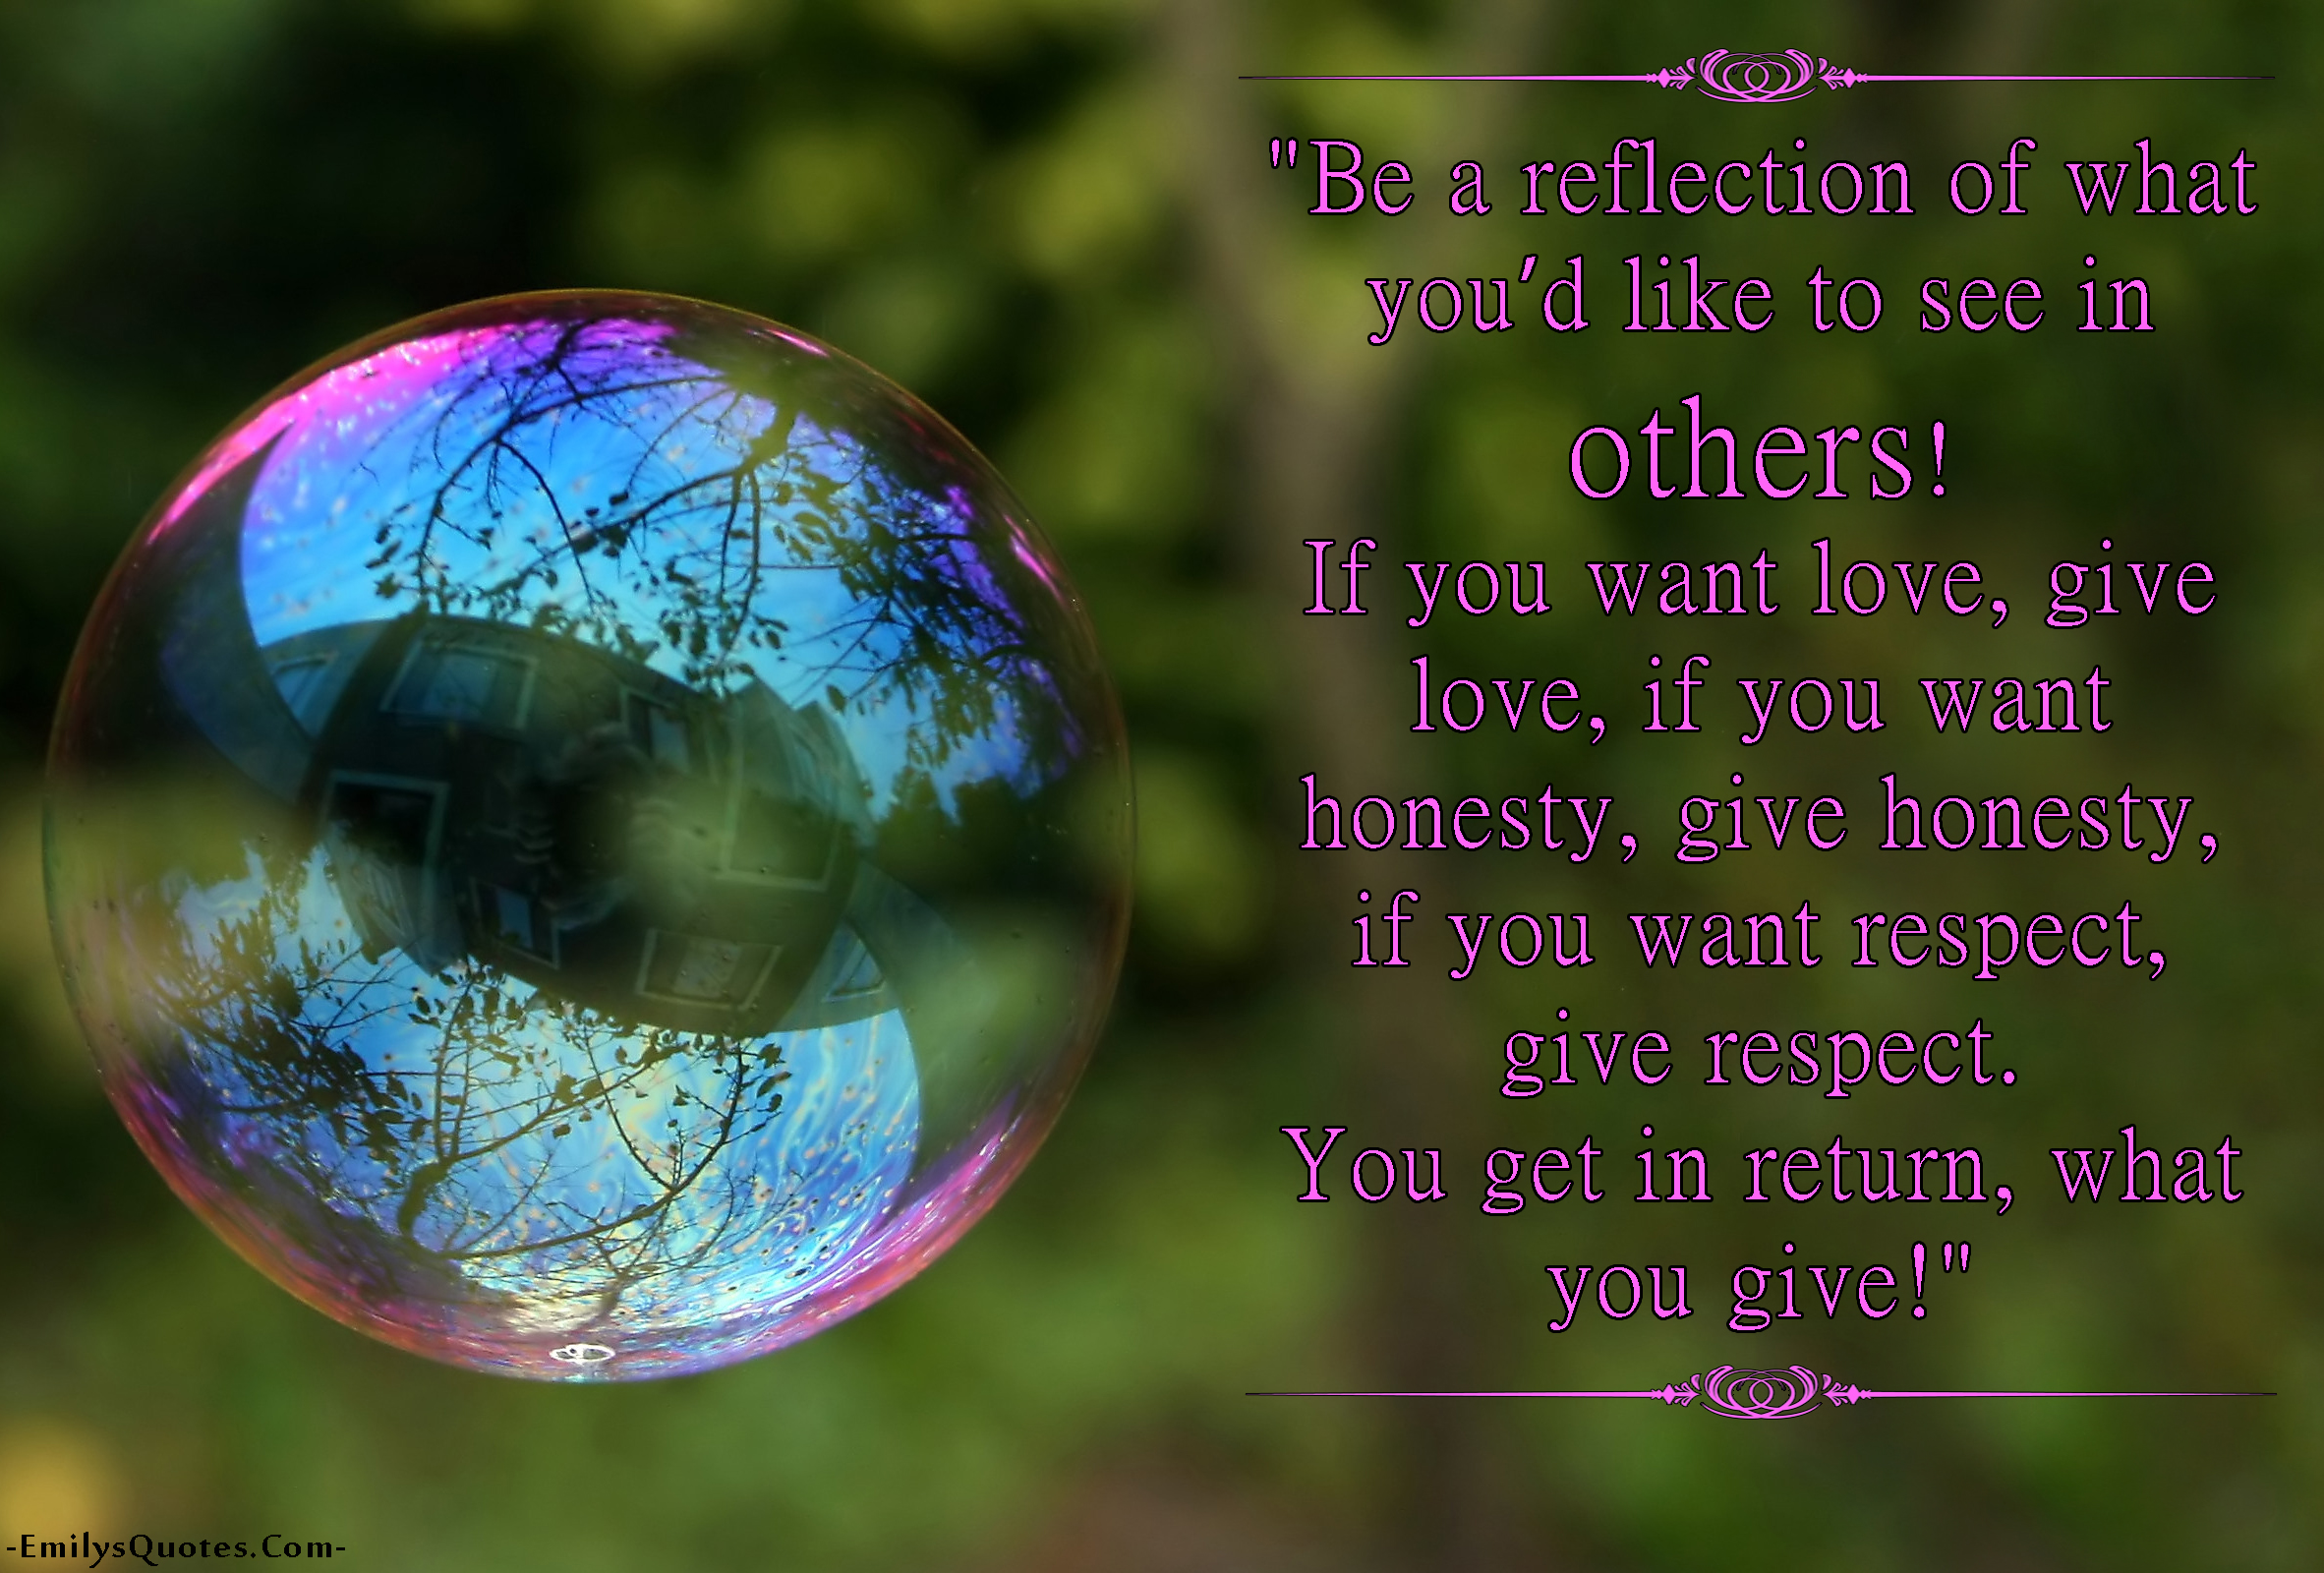 Be a reflection of what you'd like to see in others! If you want love